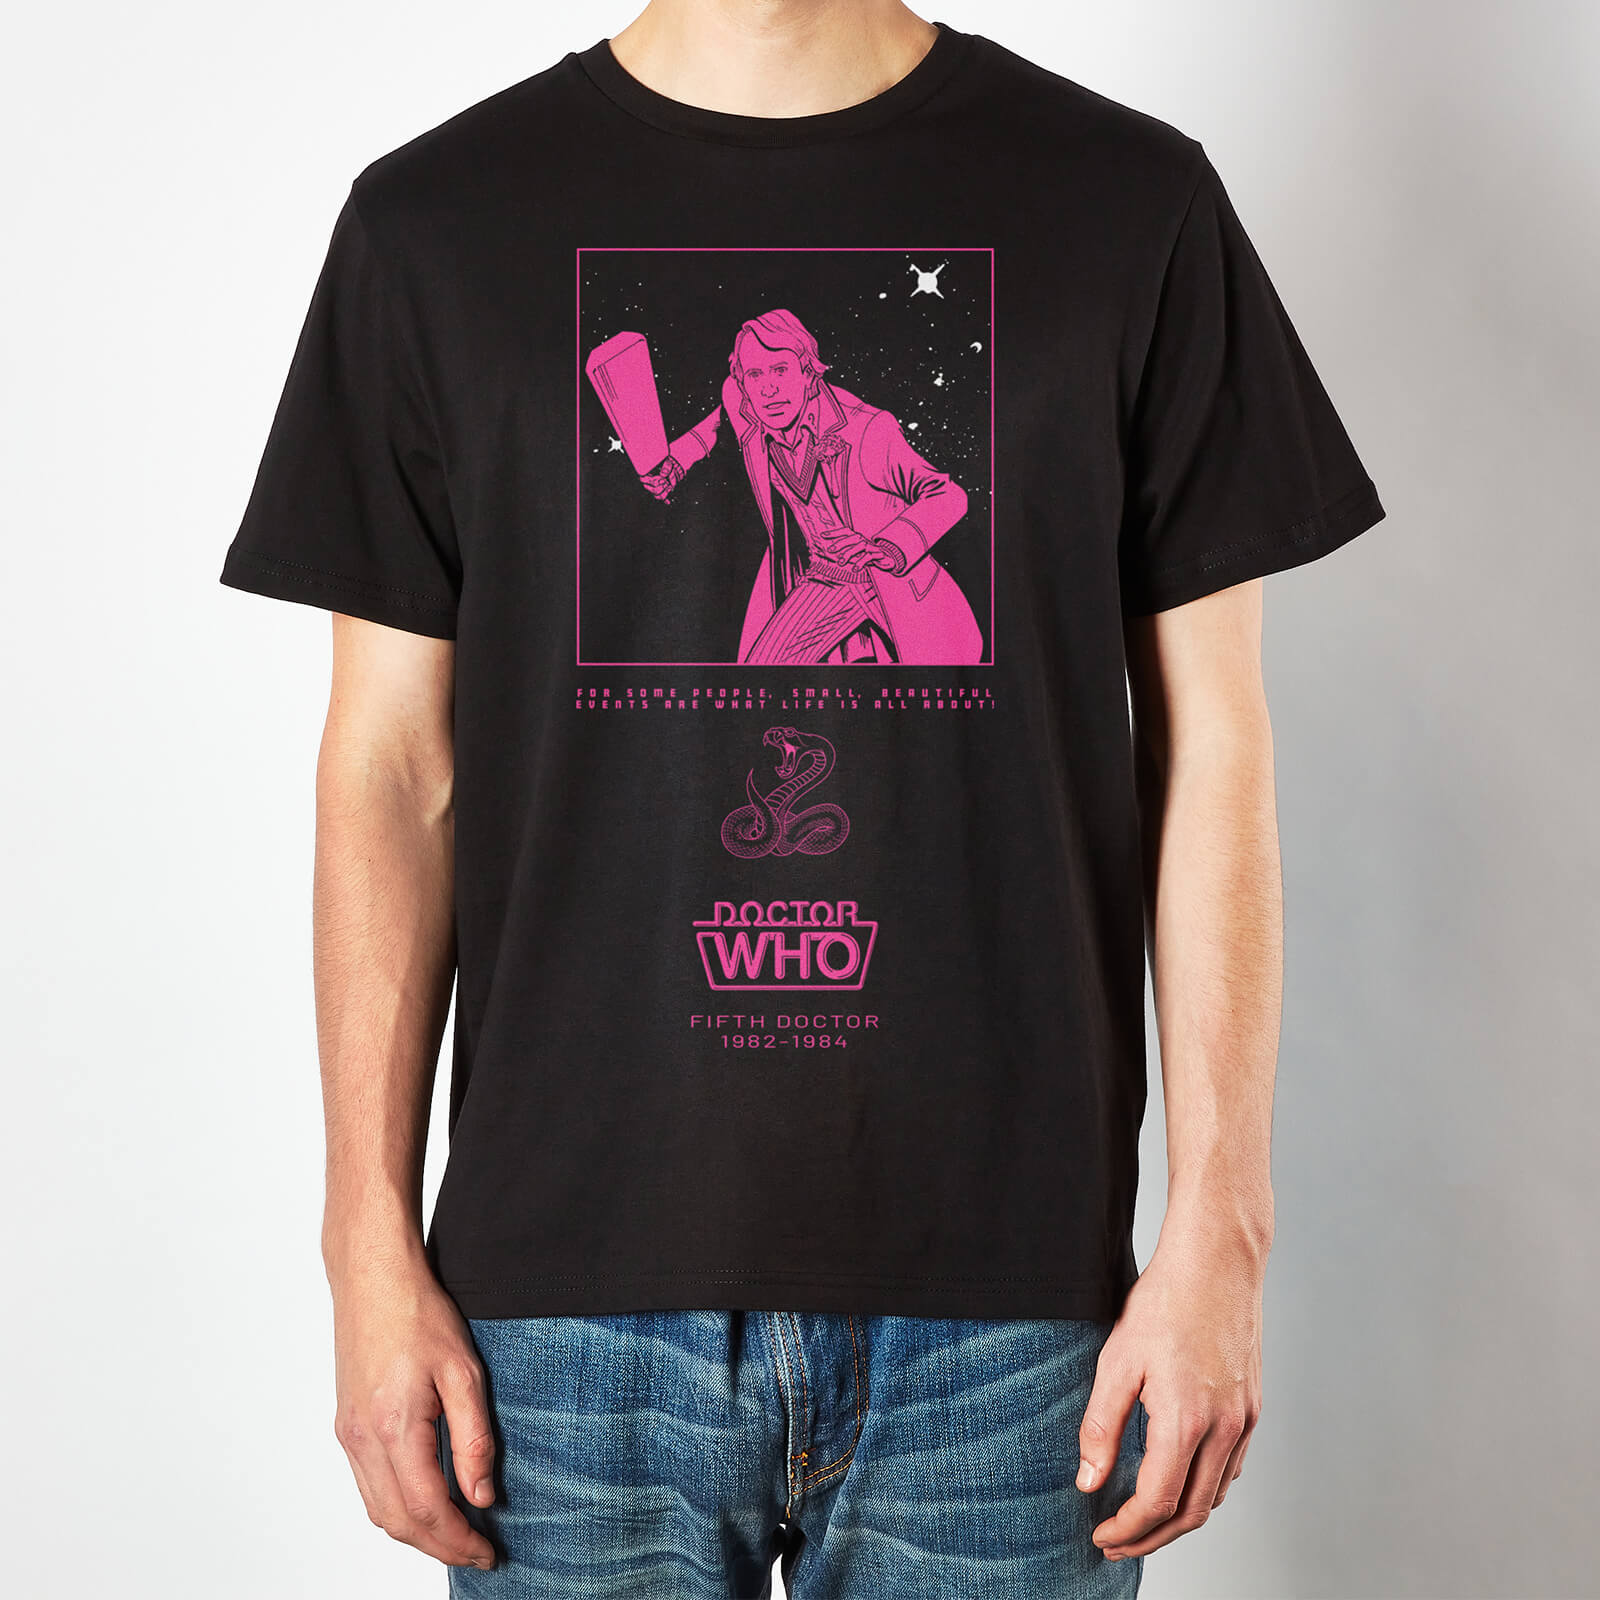 Doctor Who 5th Doctor Men's T-Shirt - Black - 5XL